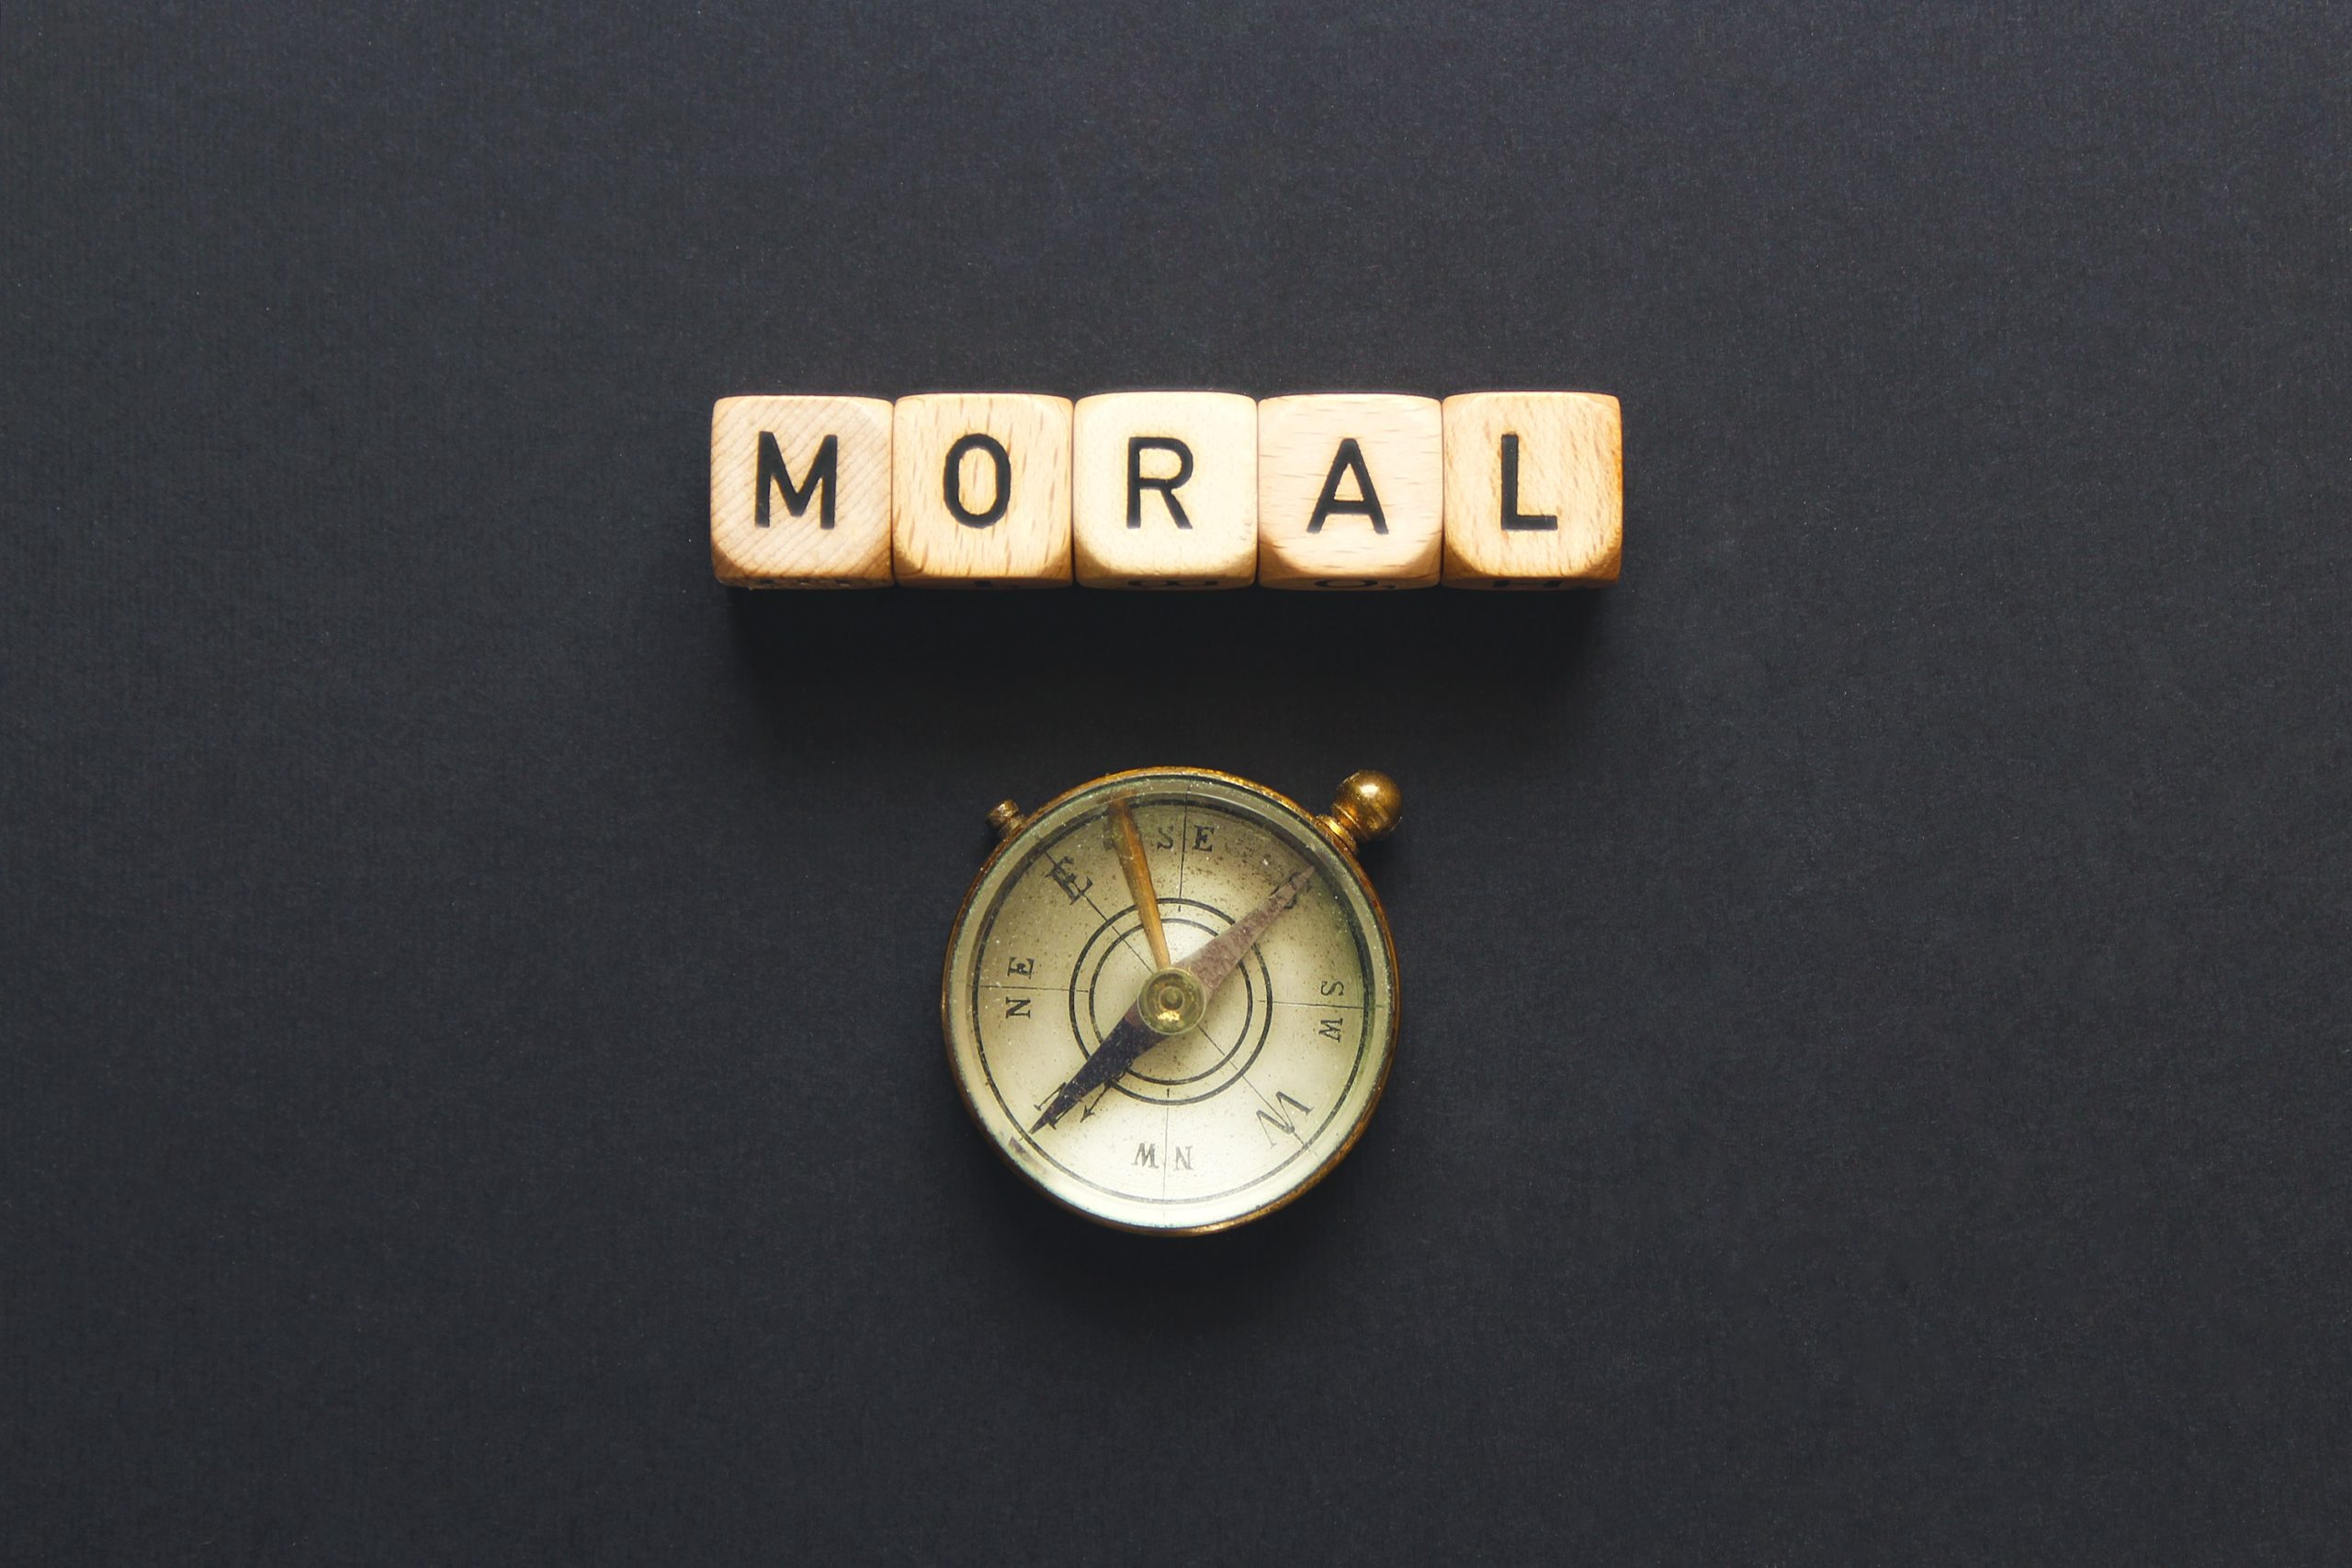 square letters that spell out the word Moral, above a compass